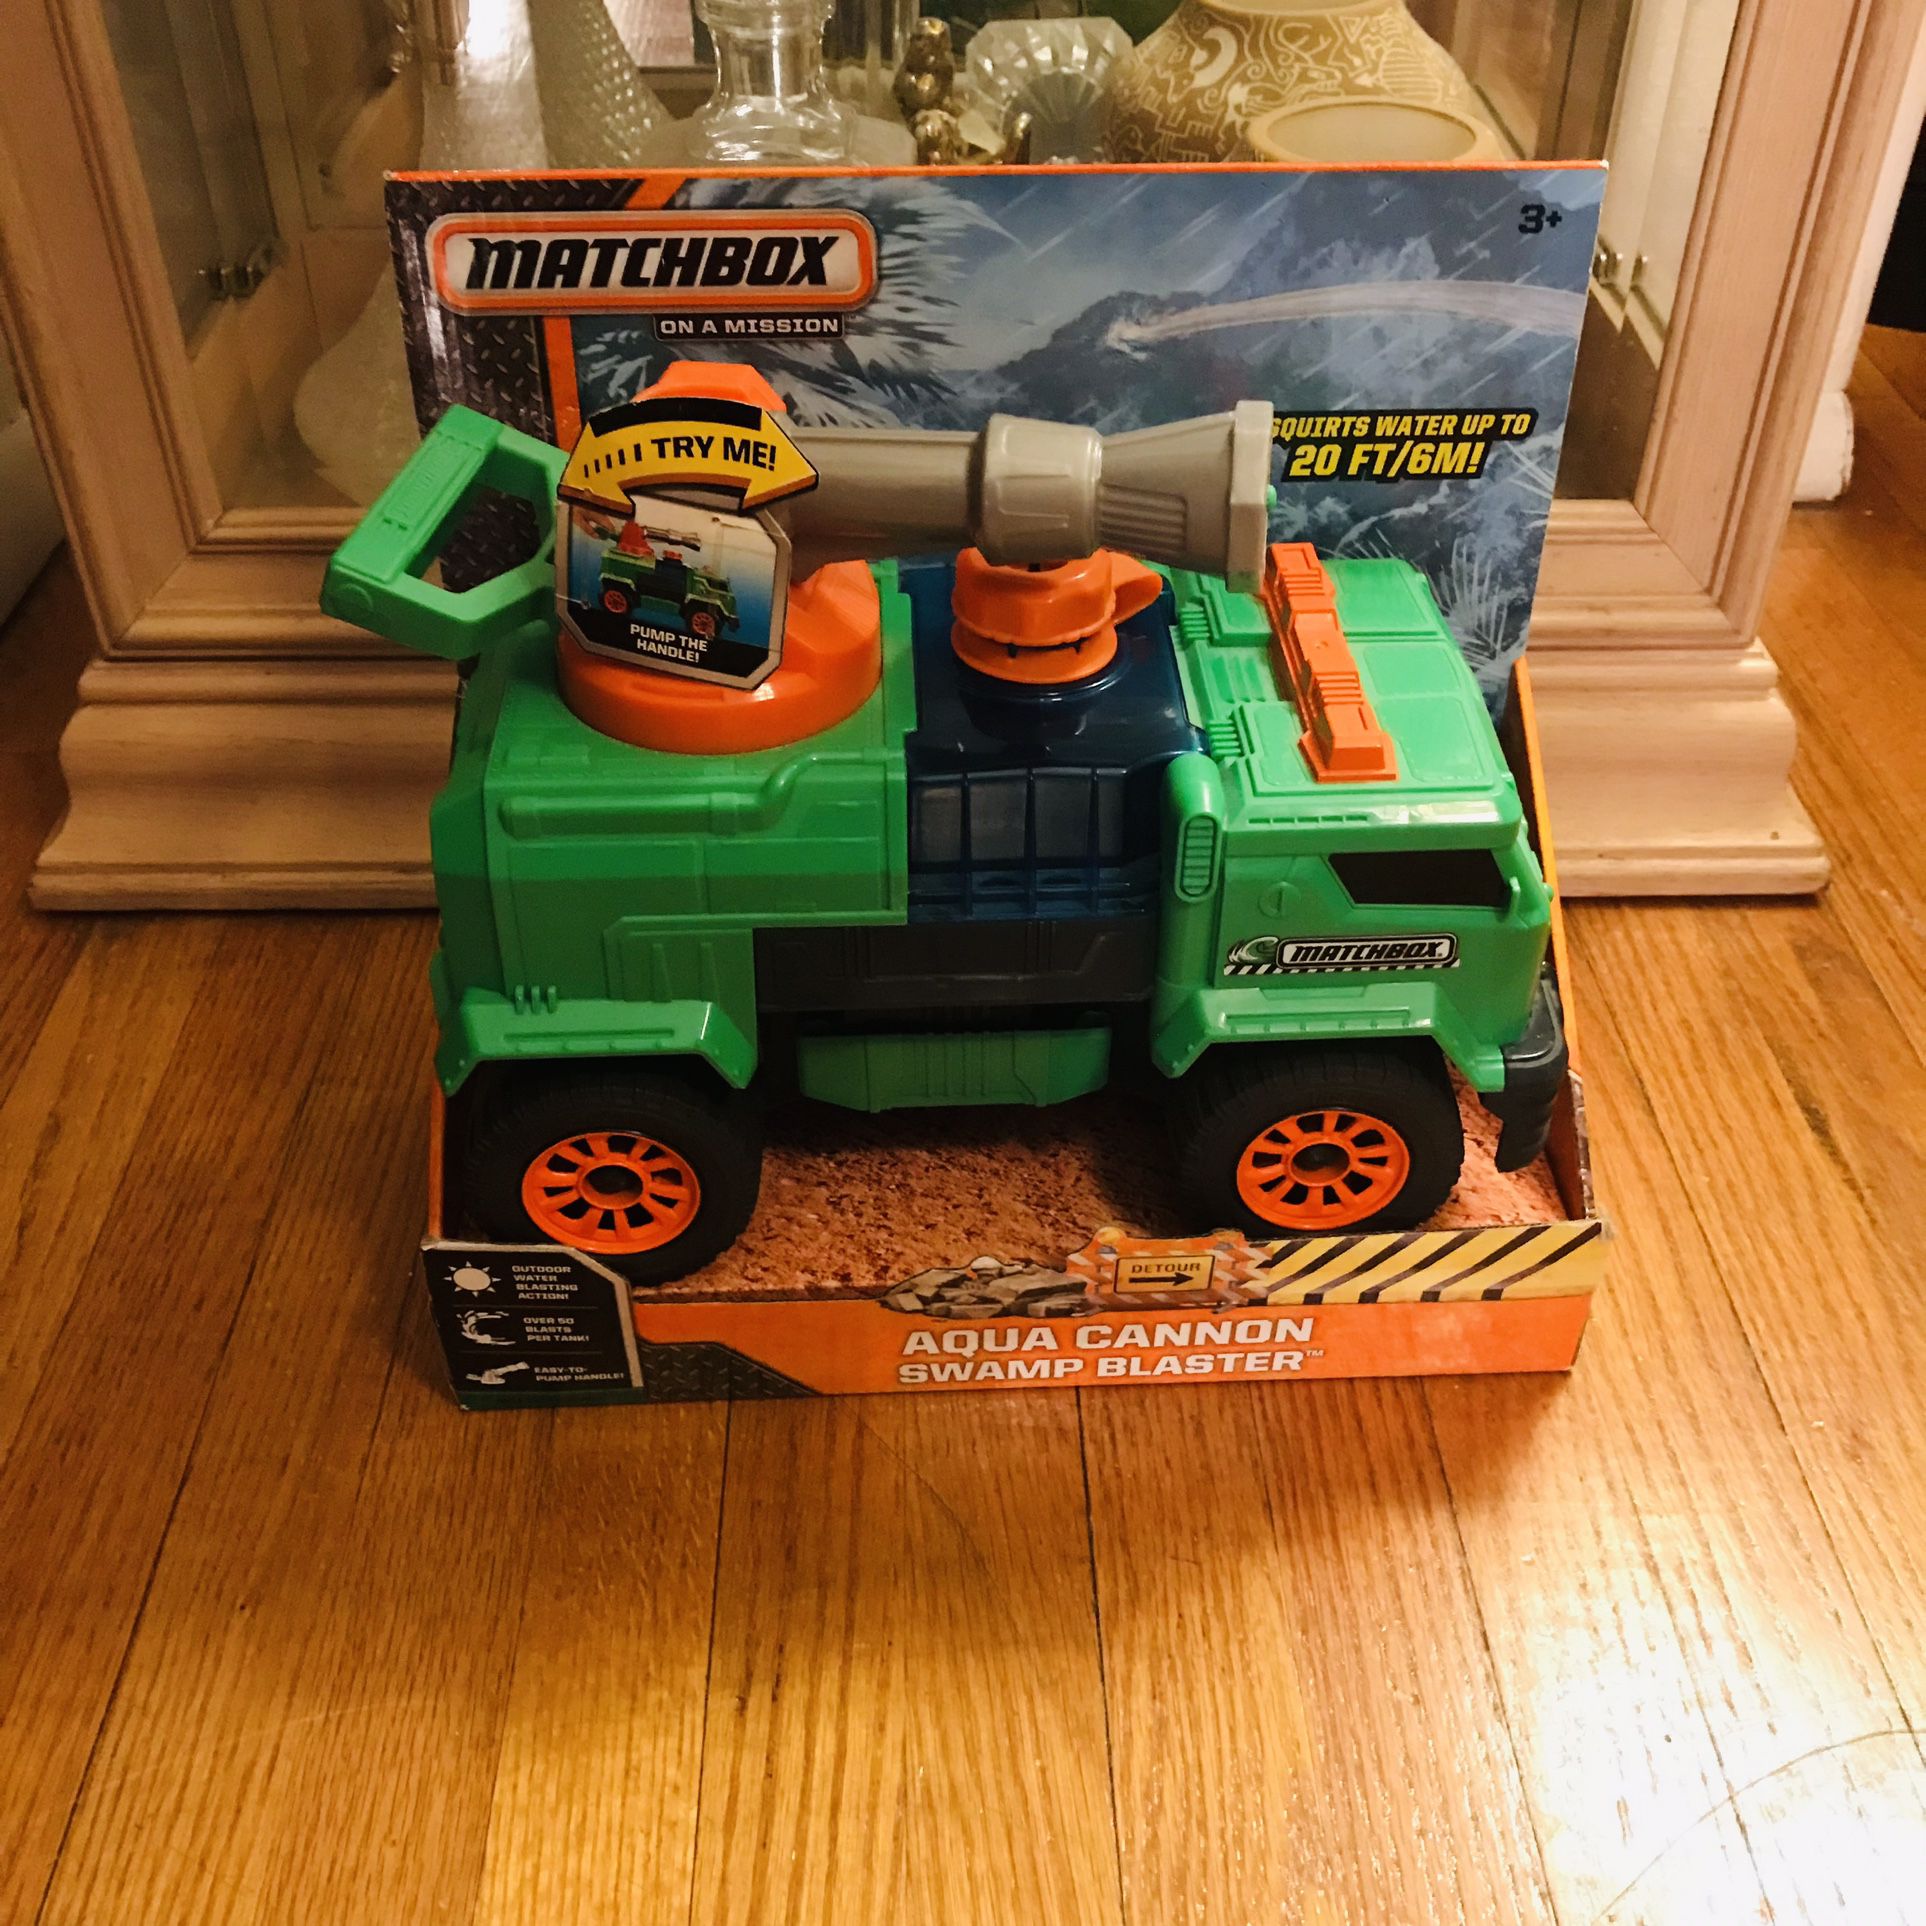 Matchbox On A Mission Aqua Cannon Swamp Blaster (New) in box